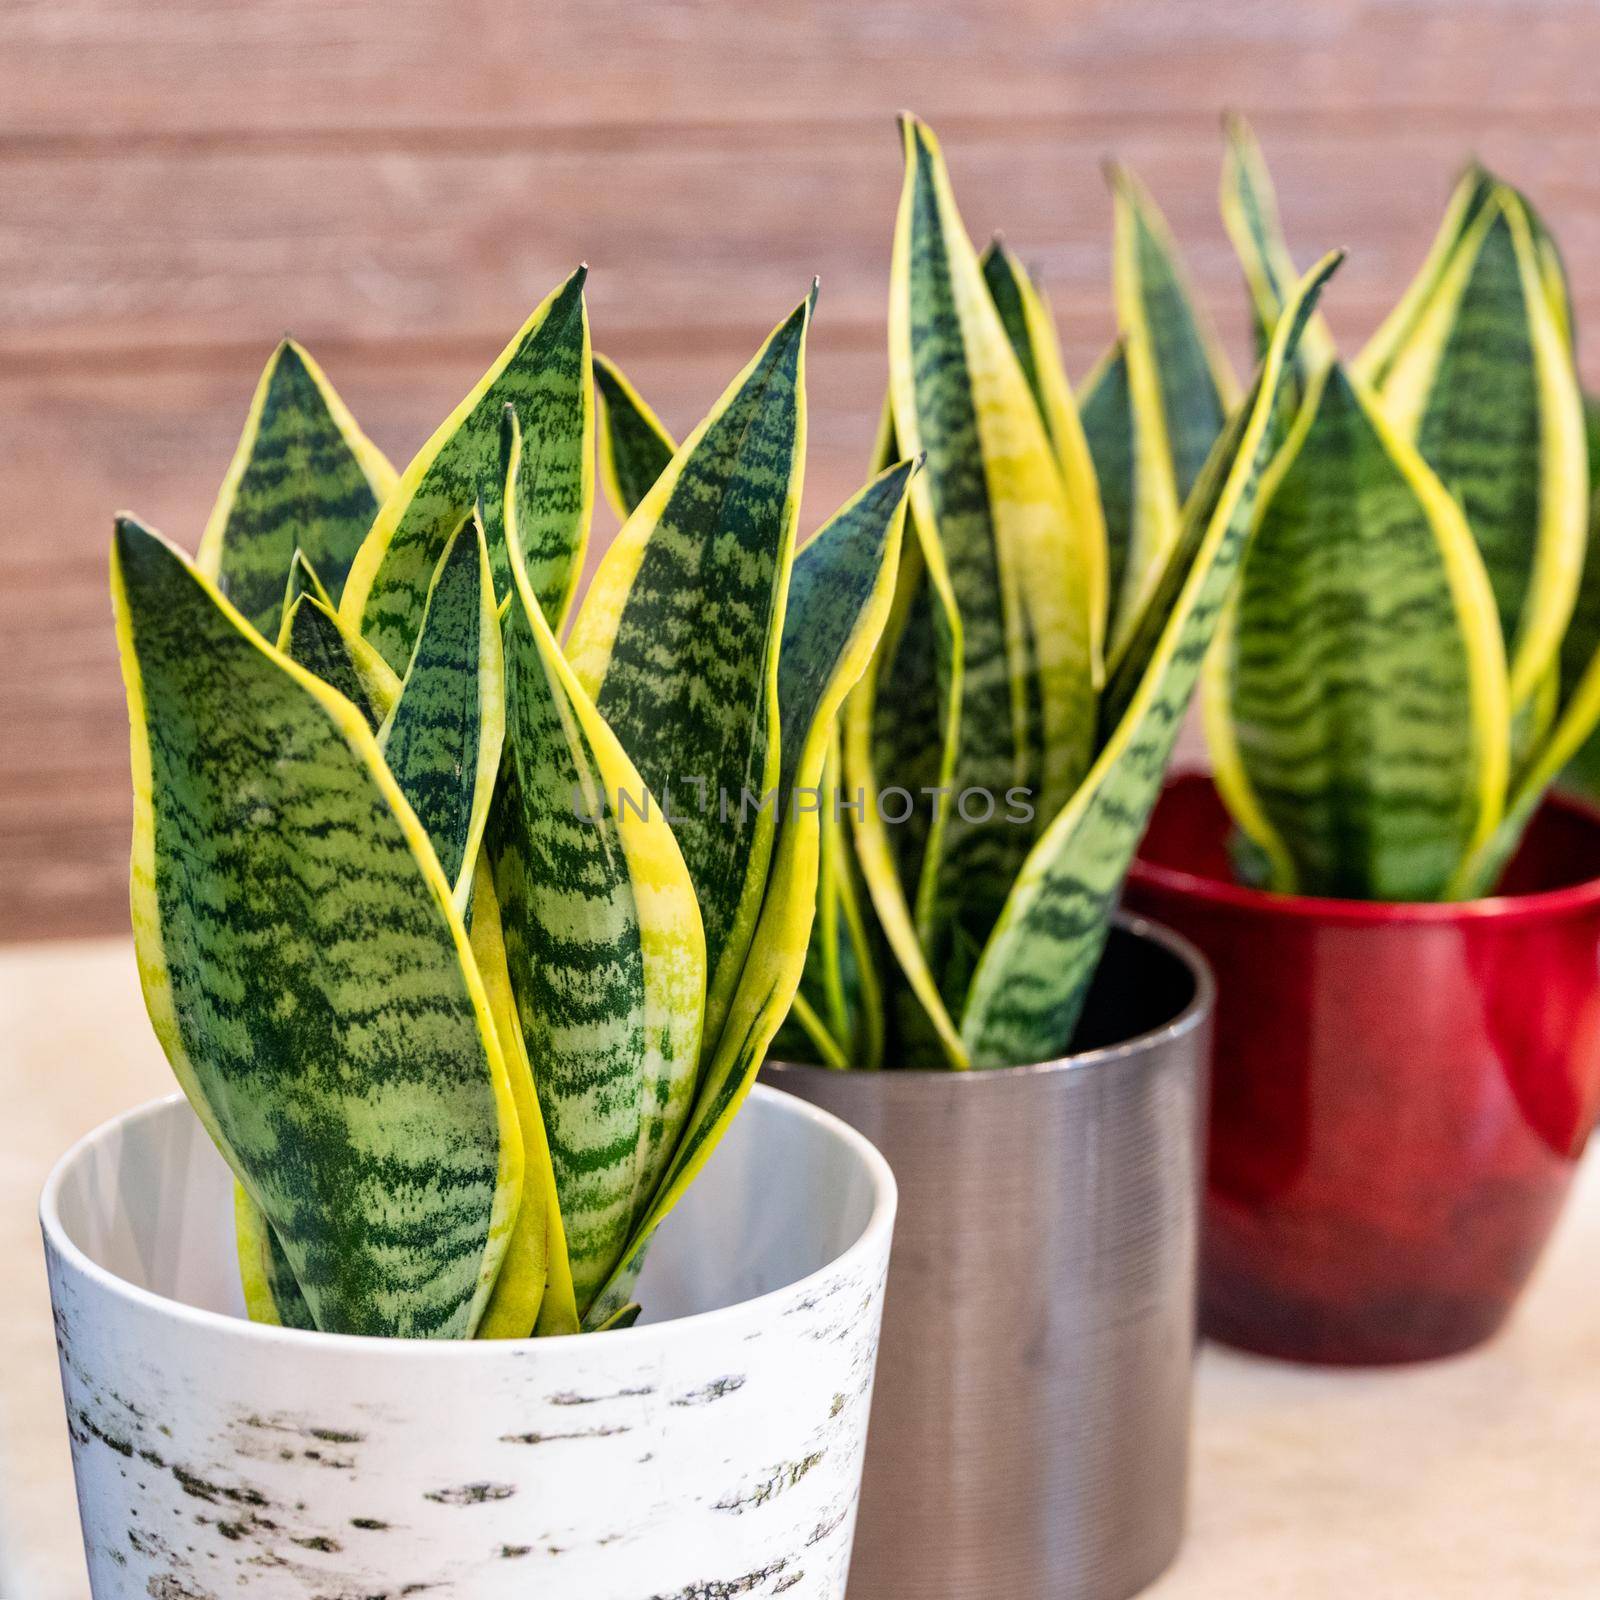 Sansevieria trifasciata Laurentii - Variegated Snake Plant in the pot close up by ferhad